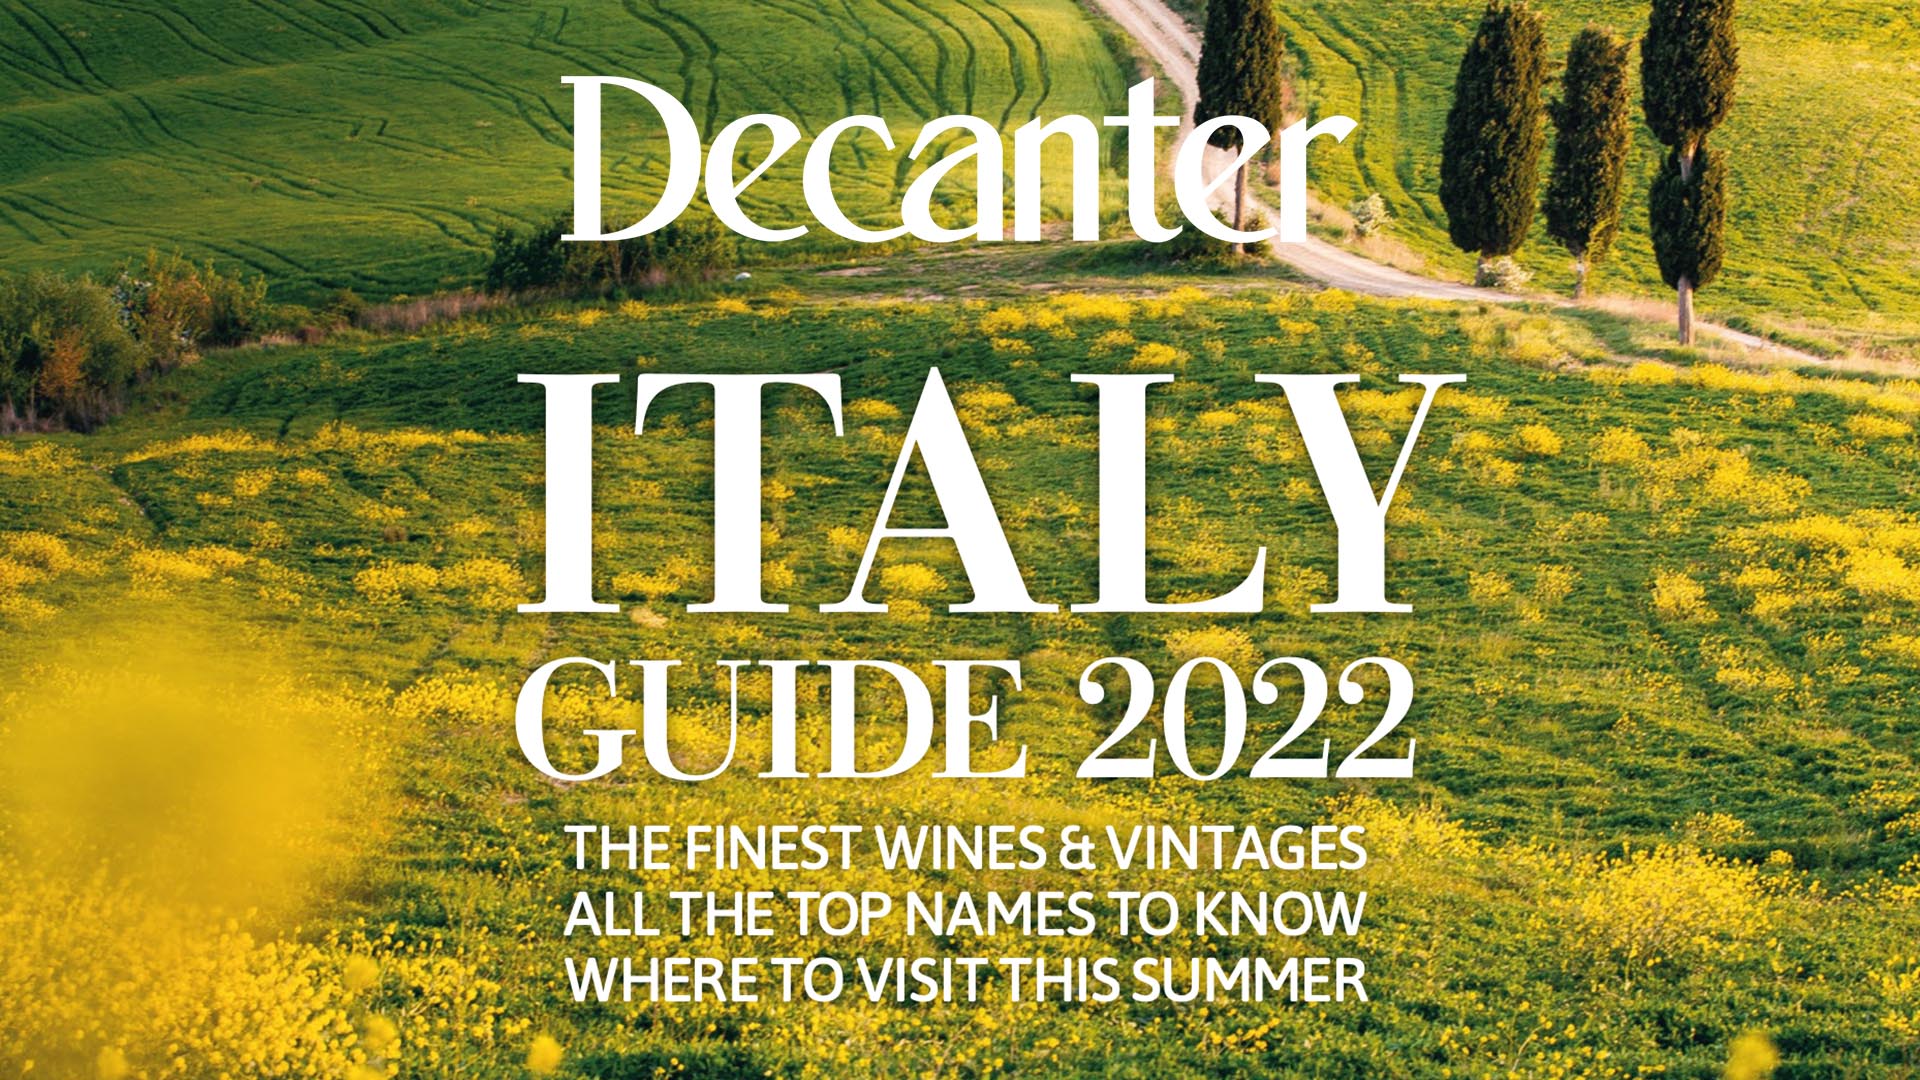 Custoza DOC Monte del Frà among the wines selected in the “Italy Guide 2022” by Decanter